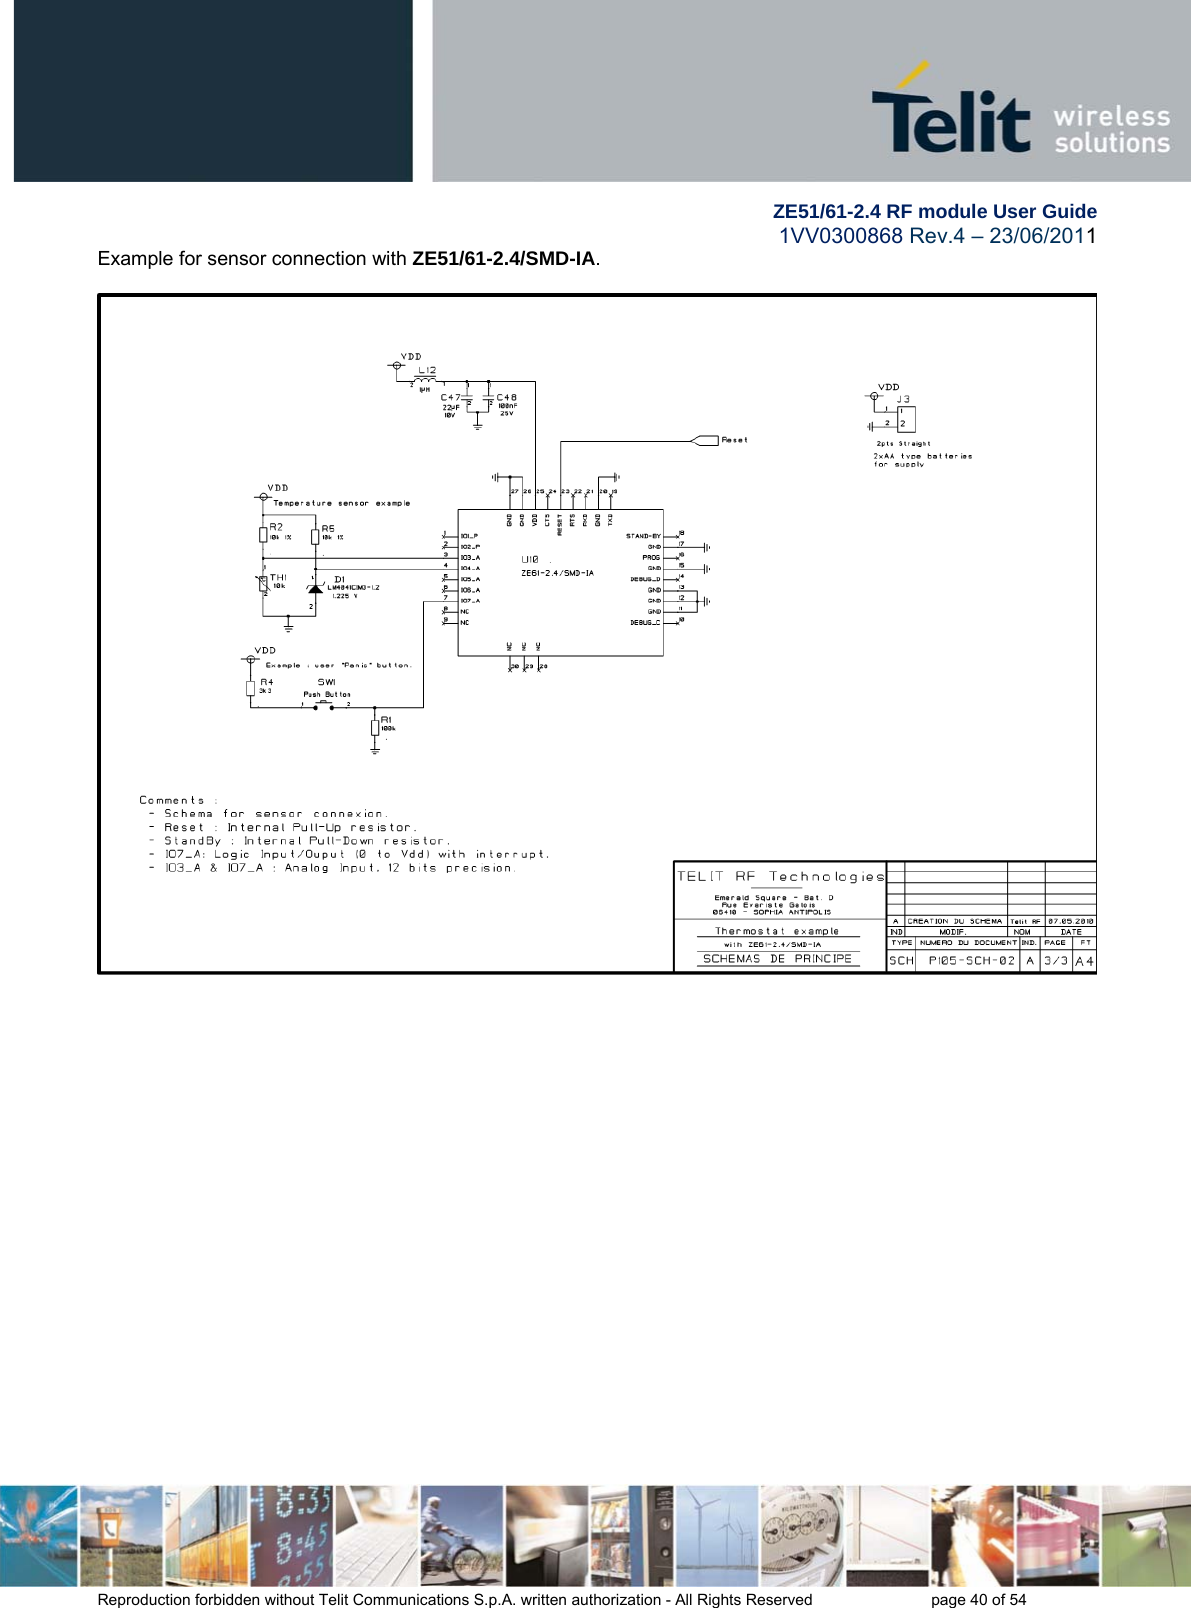         ZE51/61-2.4 RF module User Guide 1VV0300868 Rev.4 – 23/06/2011 Reproduction forbidden without Telit Communications S.p.A. written authorization - All Rights Reserved    page 40 of 54 Example for sensor connection with ZE51/61-2.4/SMD-IA.   